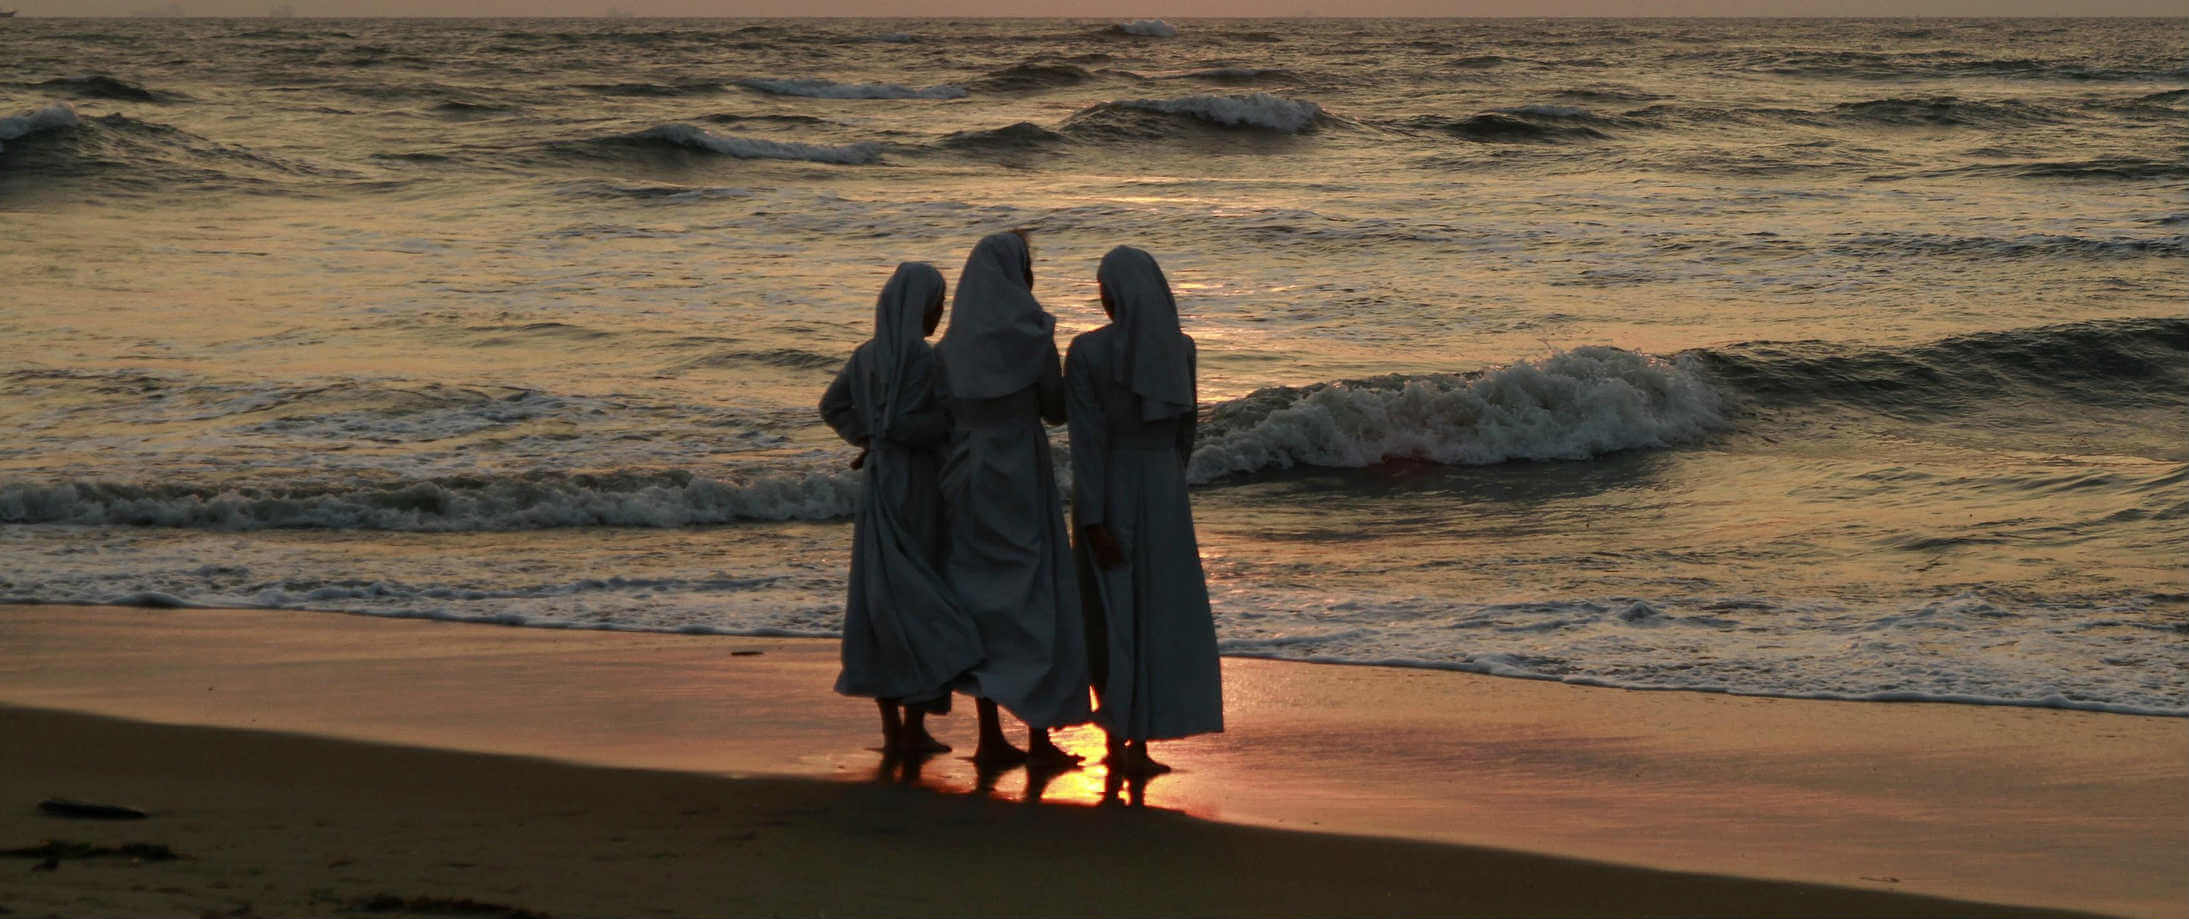 Nuns' spirit of service can lead to abuses, Vatican magazine says ...